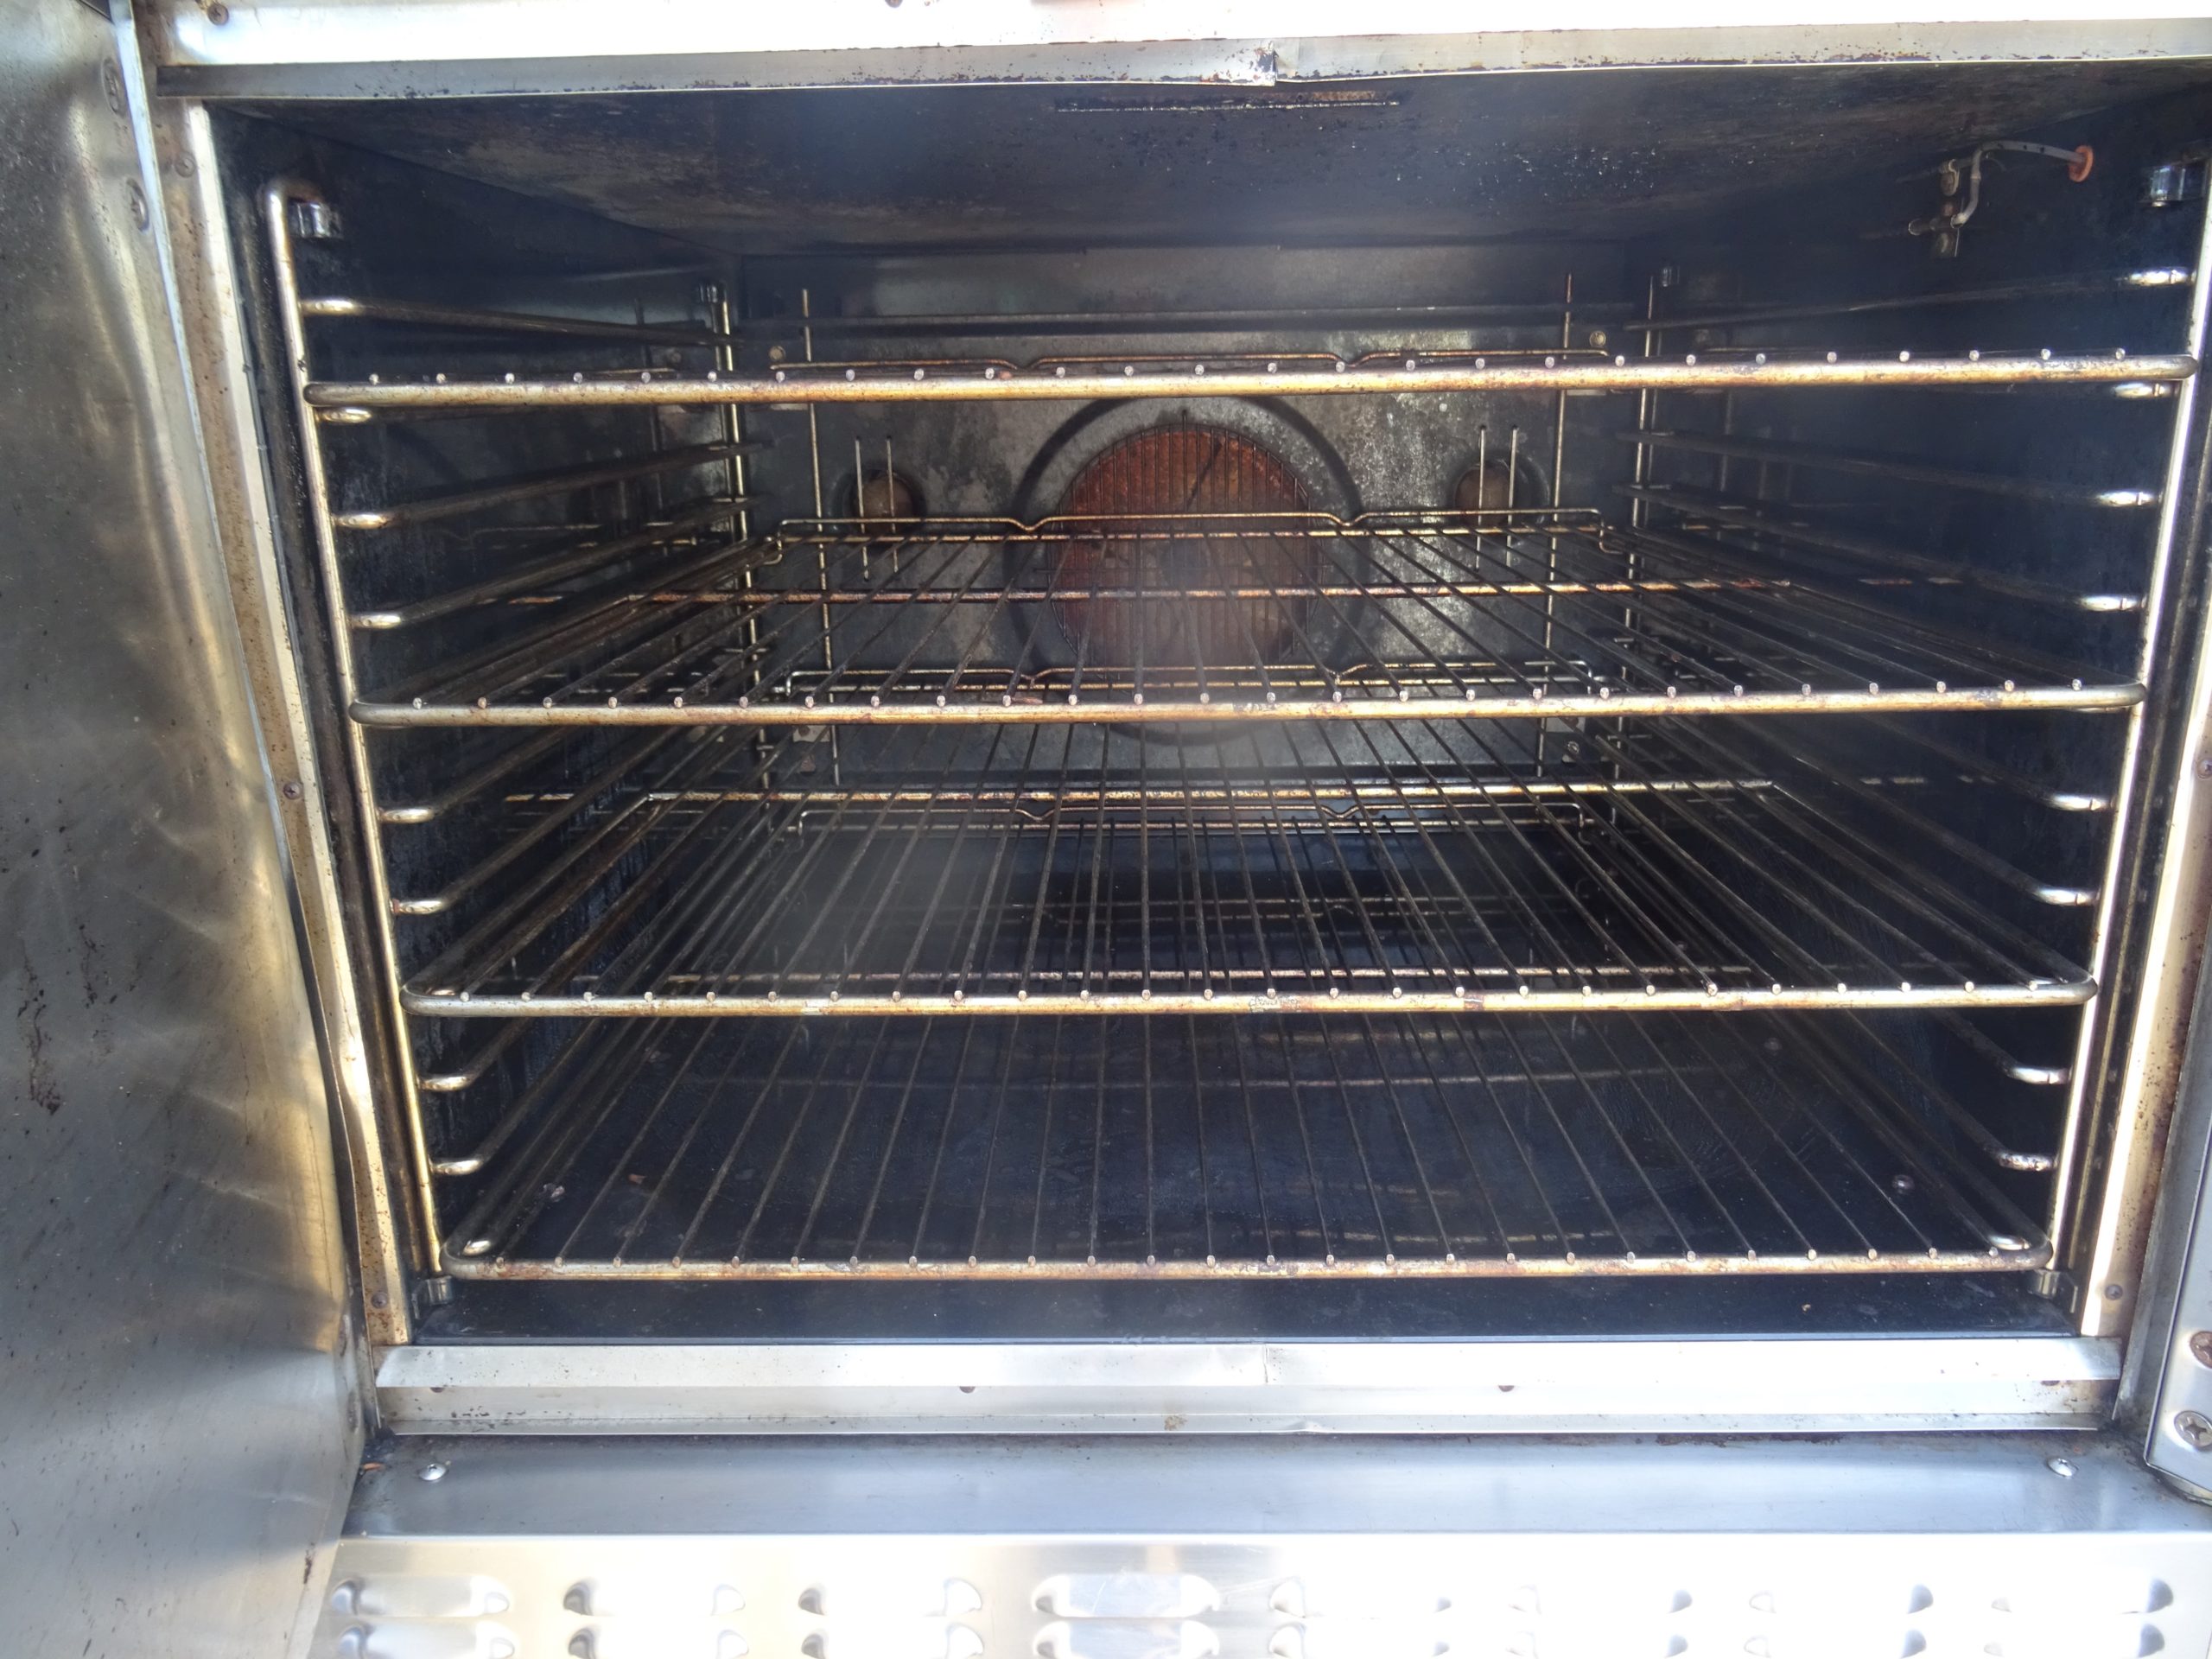 BLODGETT Xephaire Gas Convection Oven with Stand